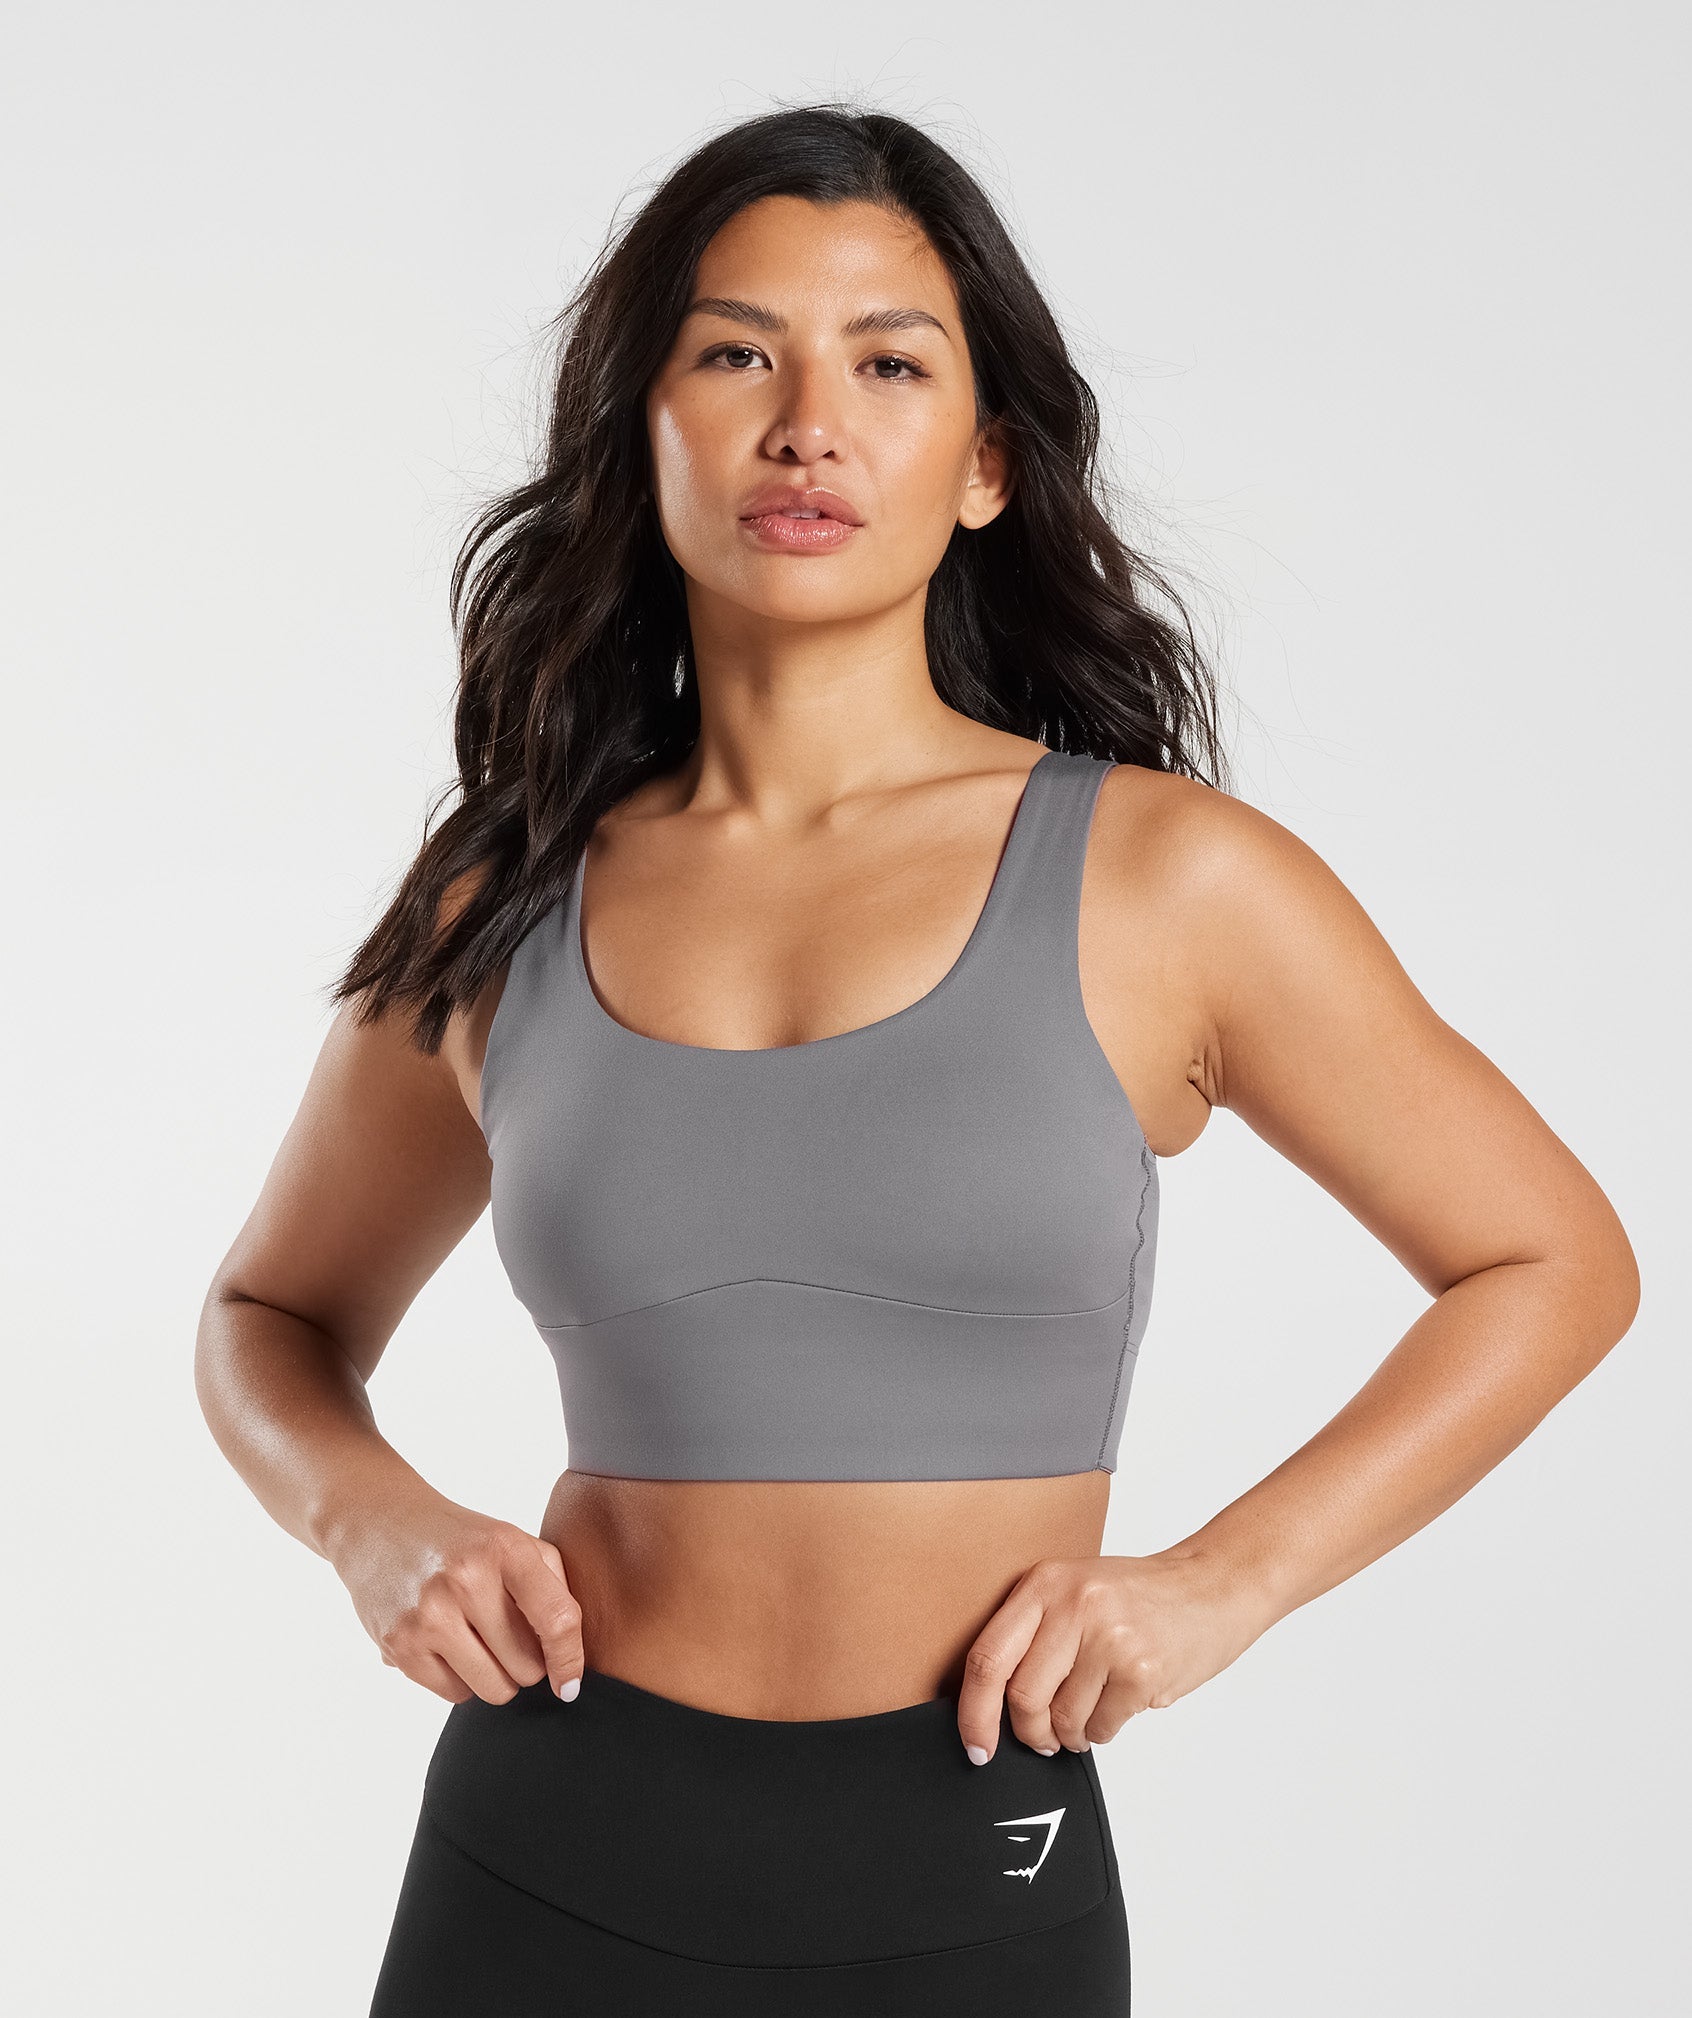 NEW GYMSHARK SPORTS BRAS + CTY COLLECTION REVIEW